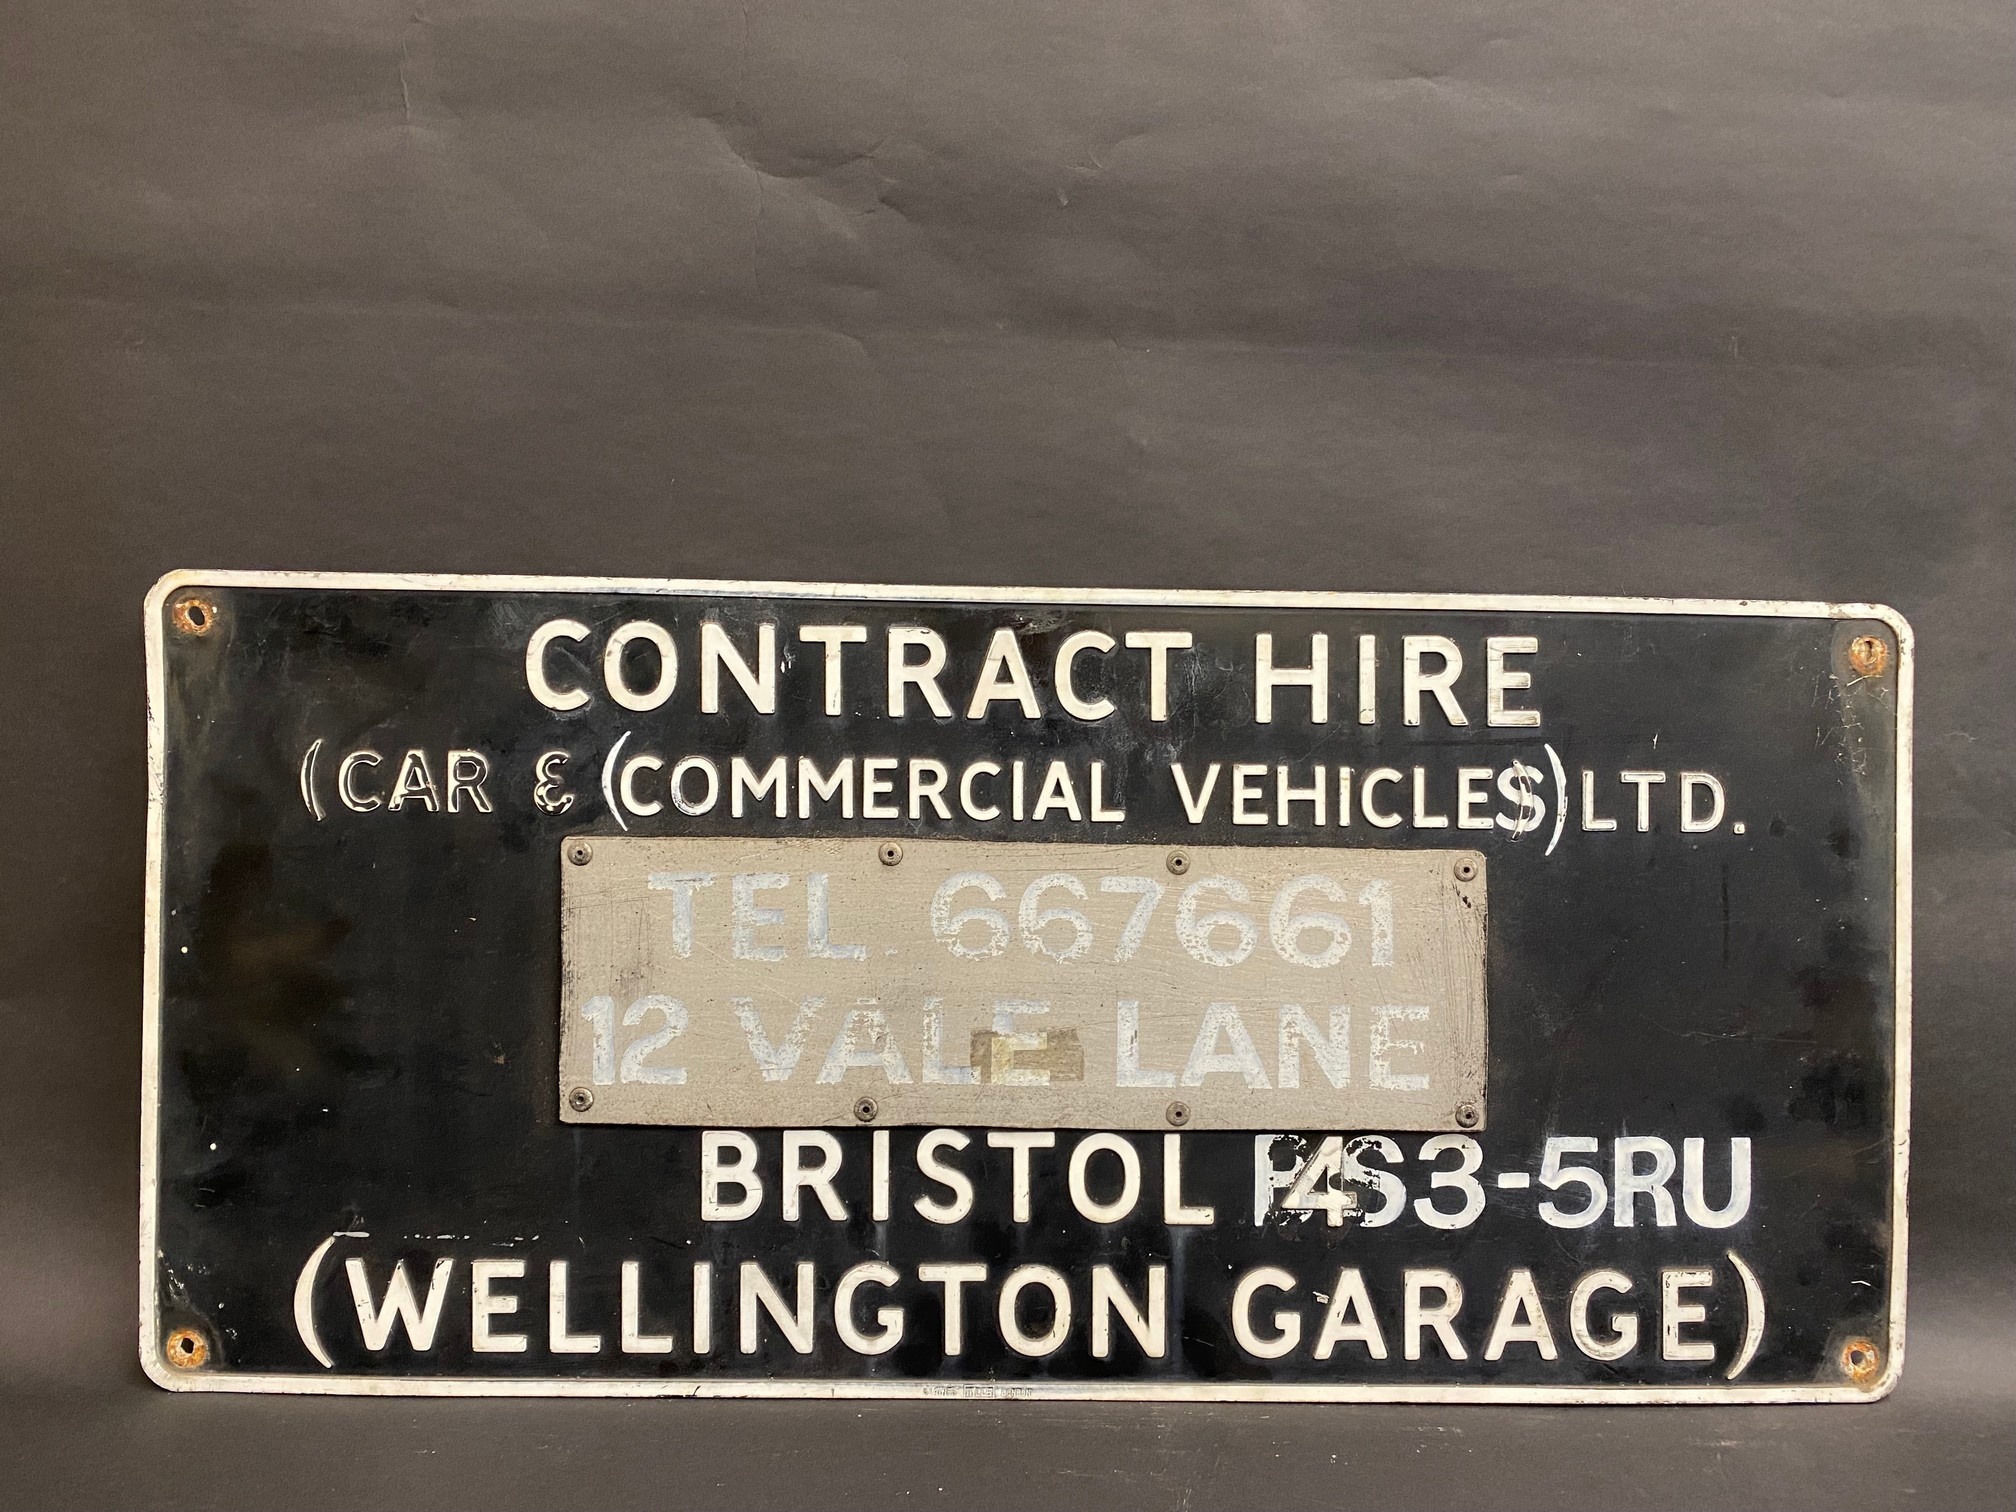 A rectangular advertising sign for 'Contract Hire' at Wellington Garage, Bristol, 30 x 14".